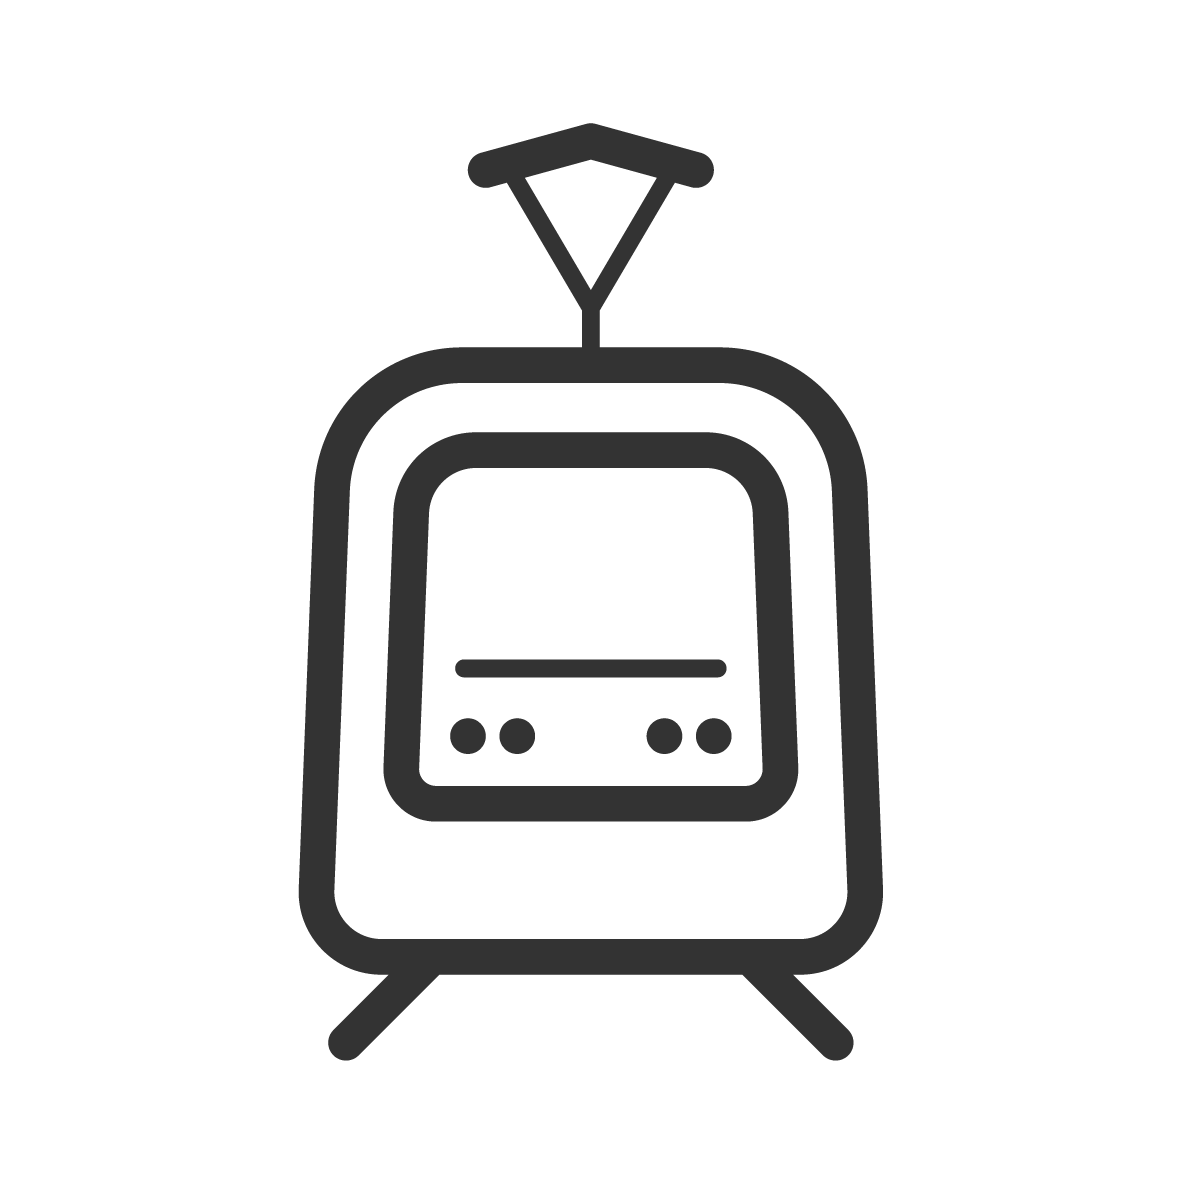 Icon of a tram